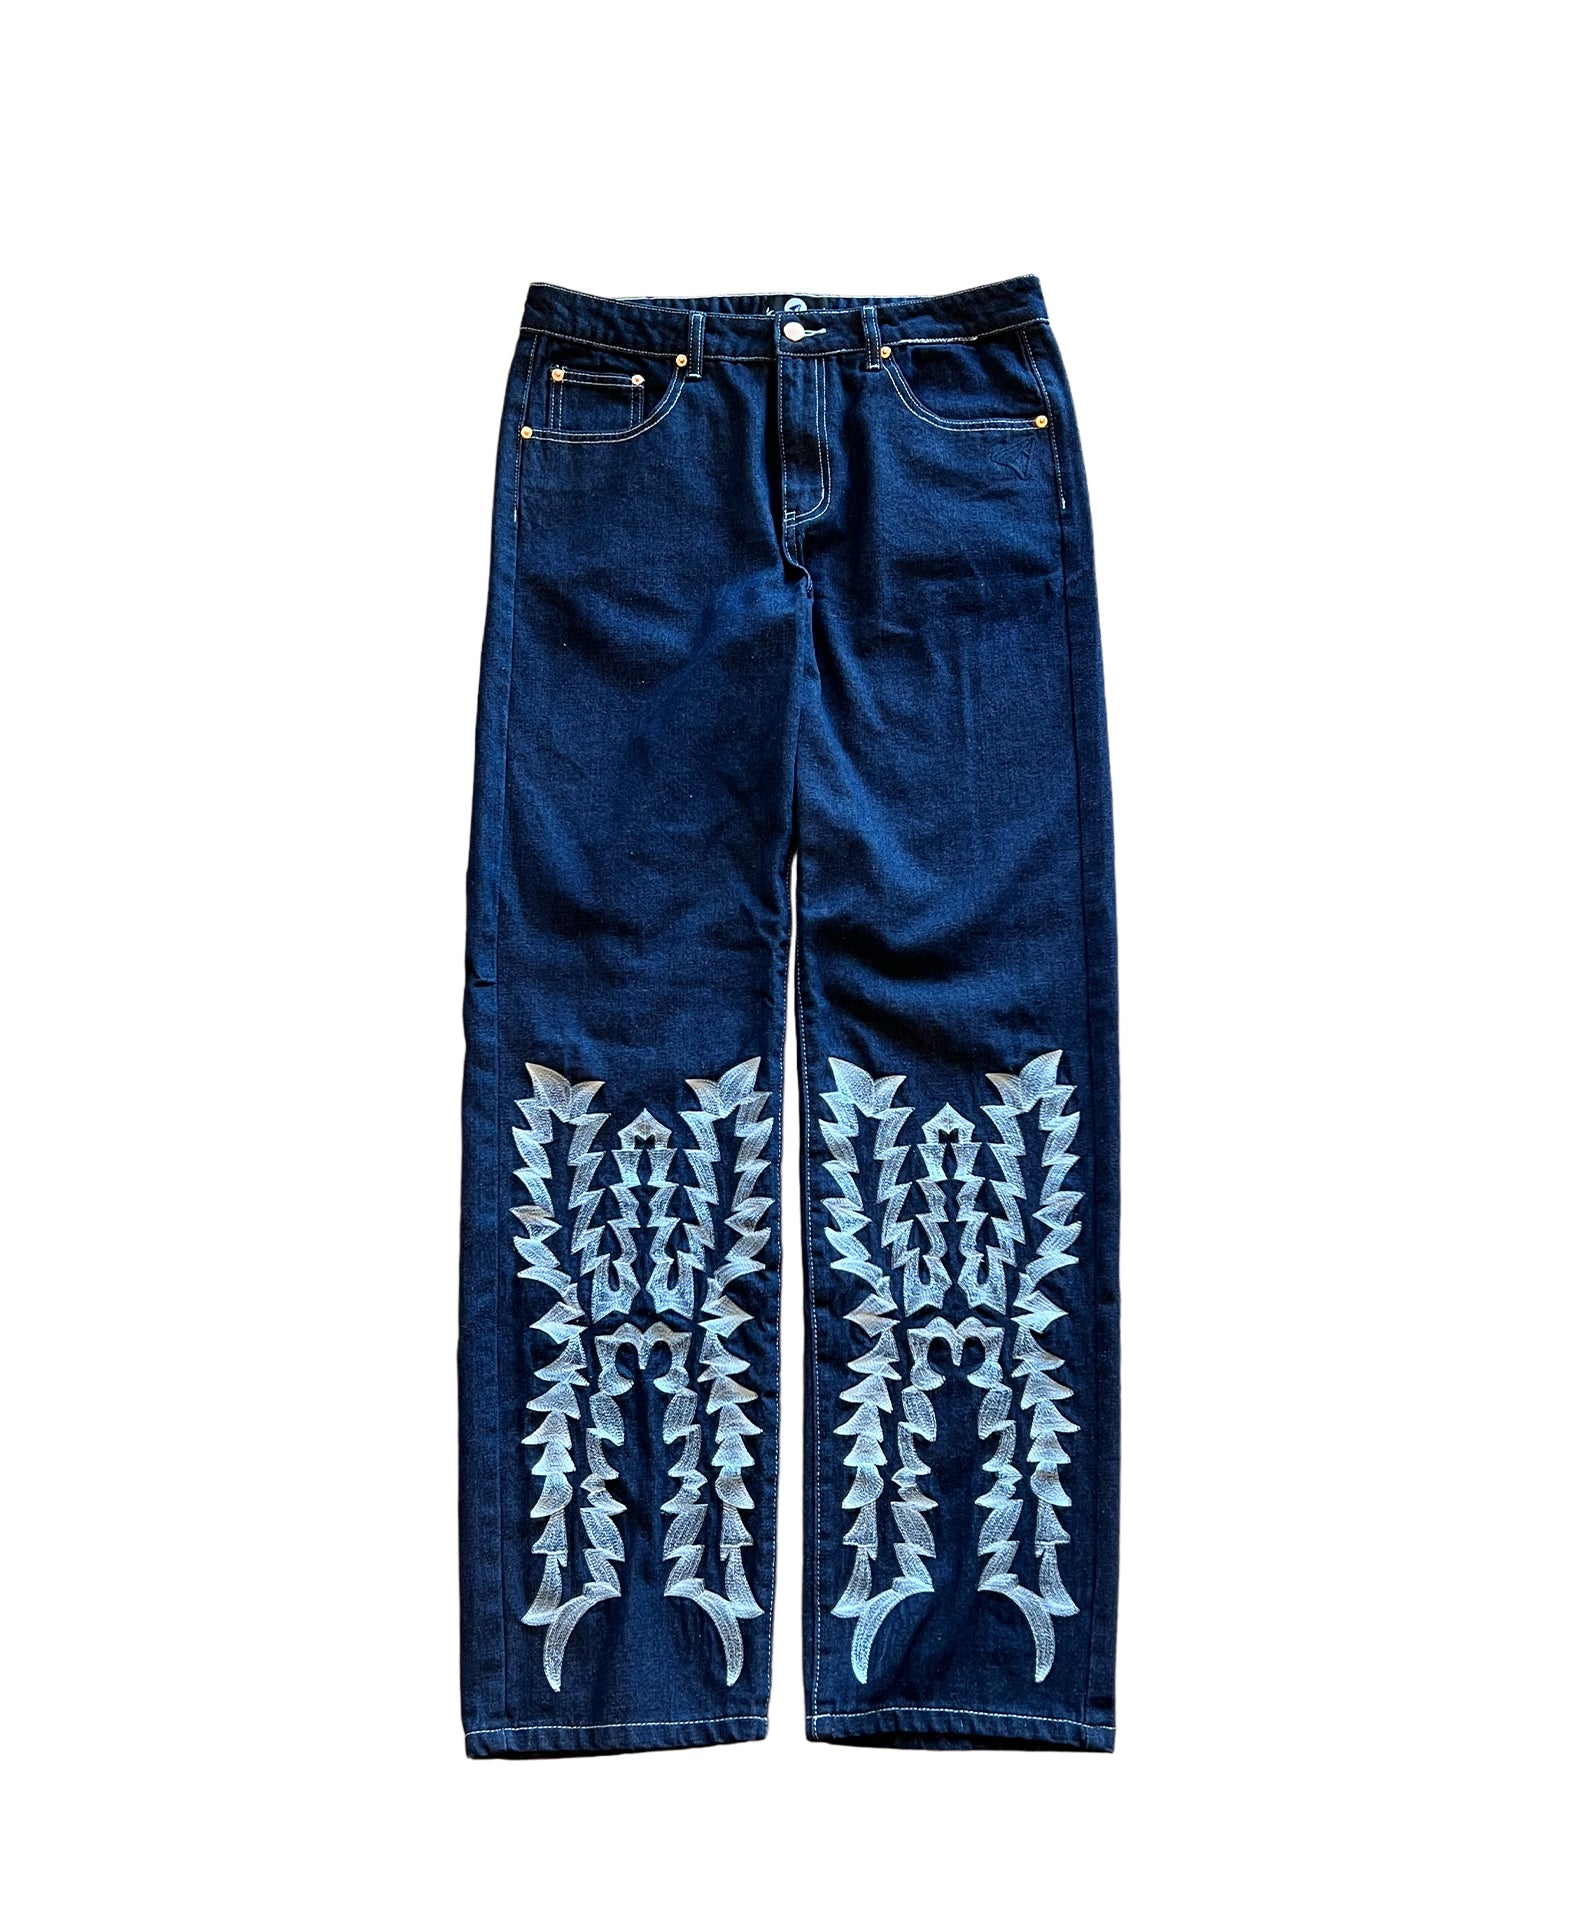 Thorn jeans - Sample